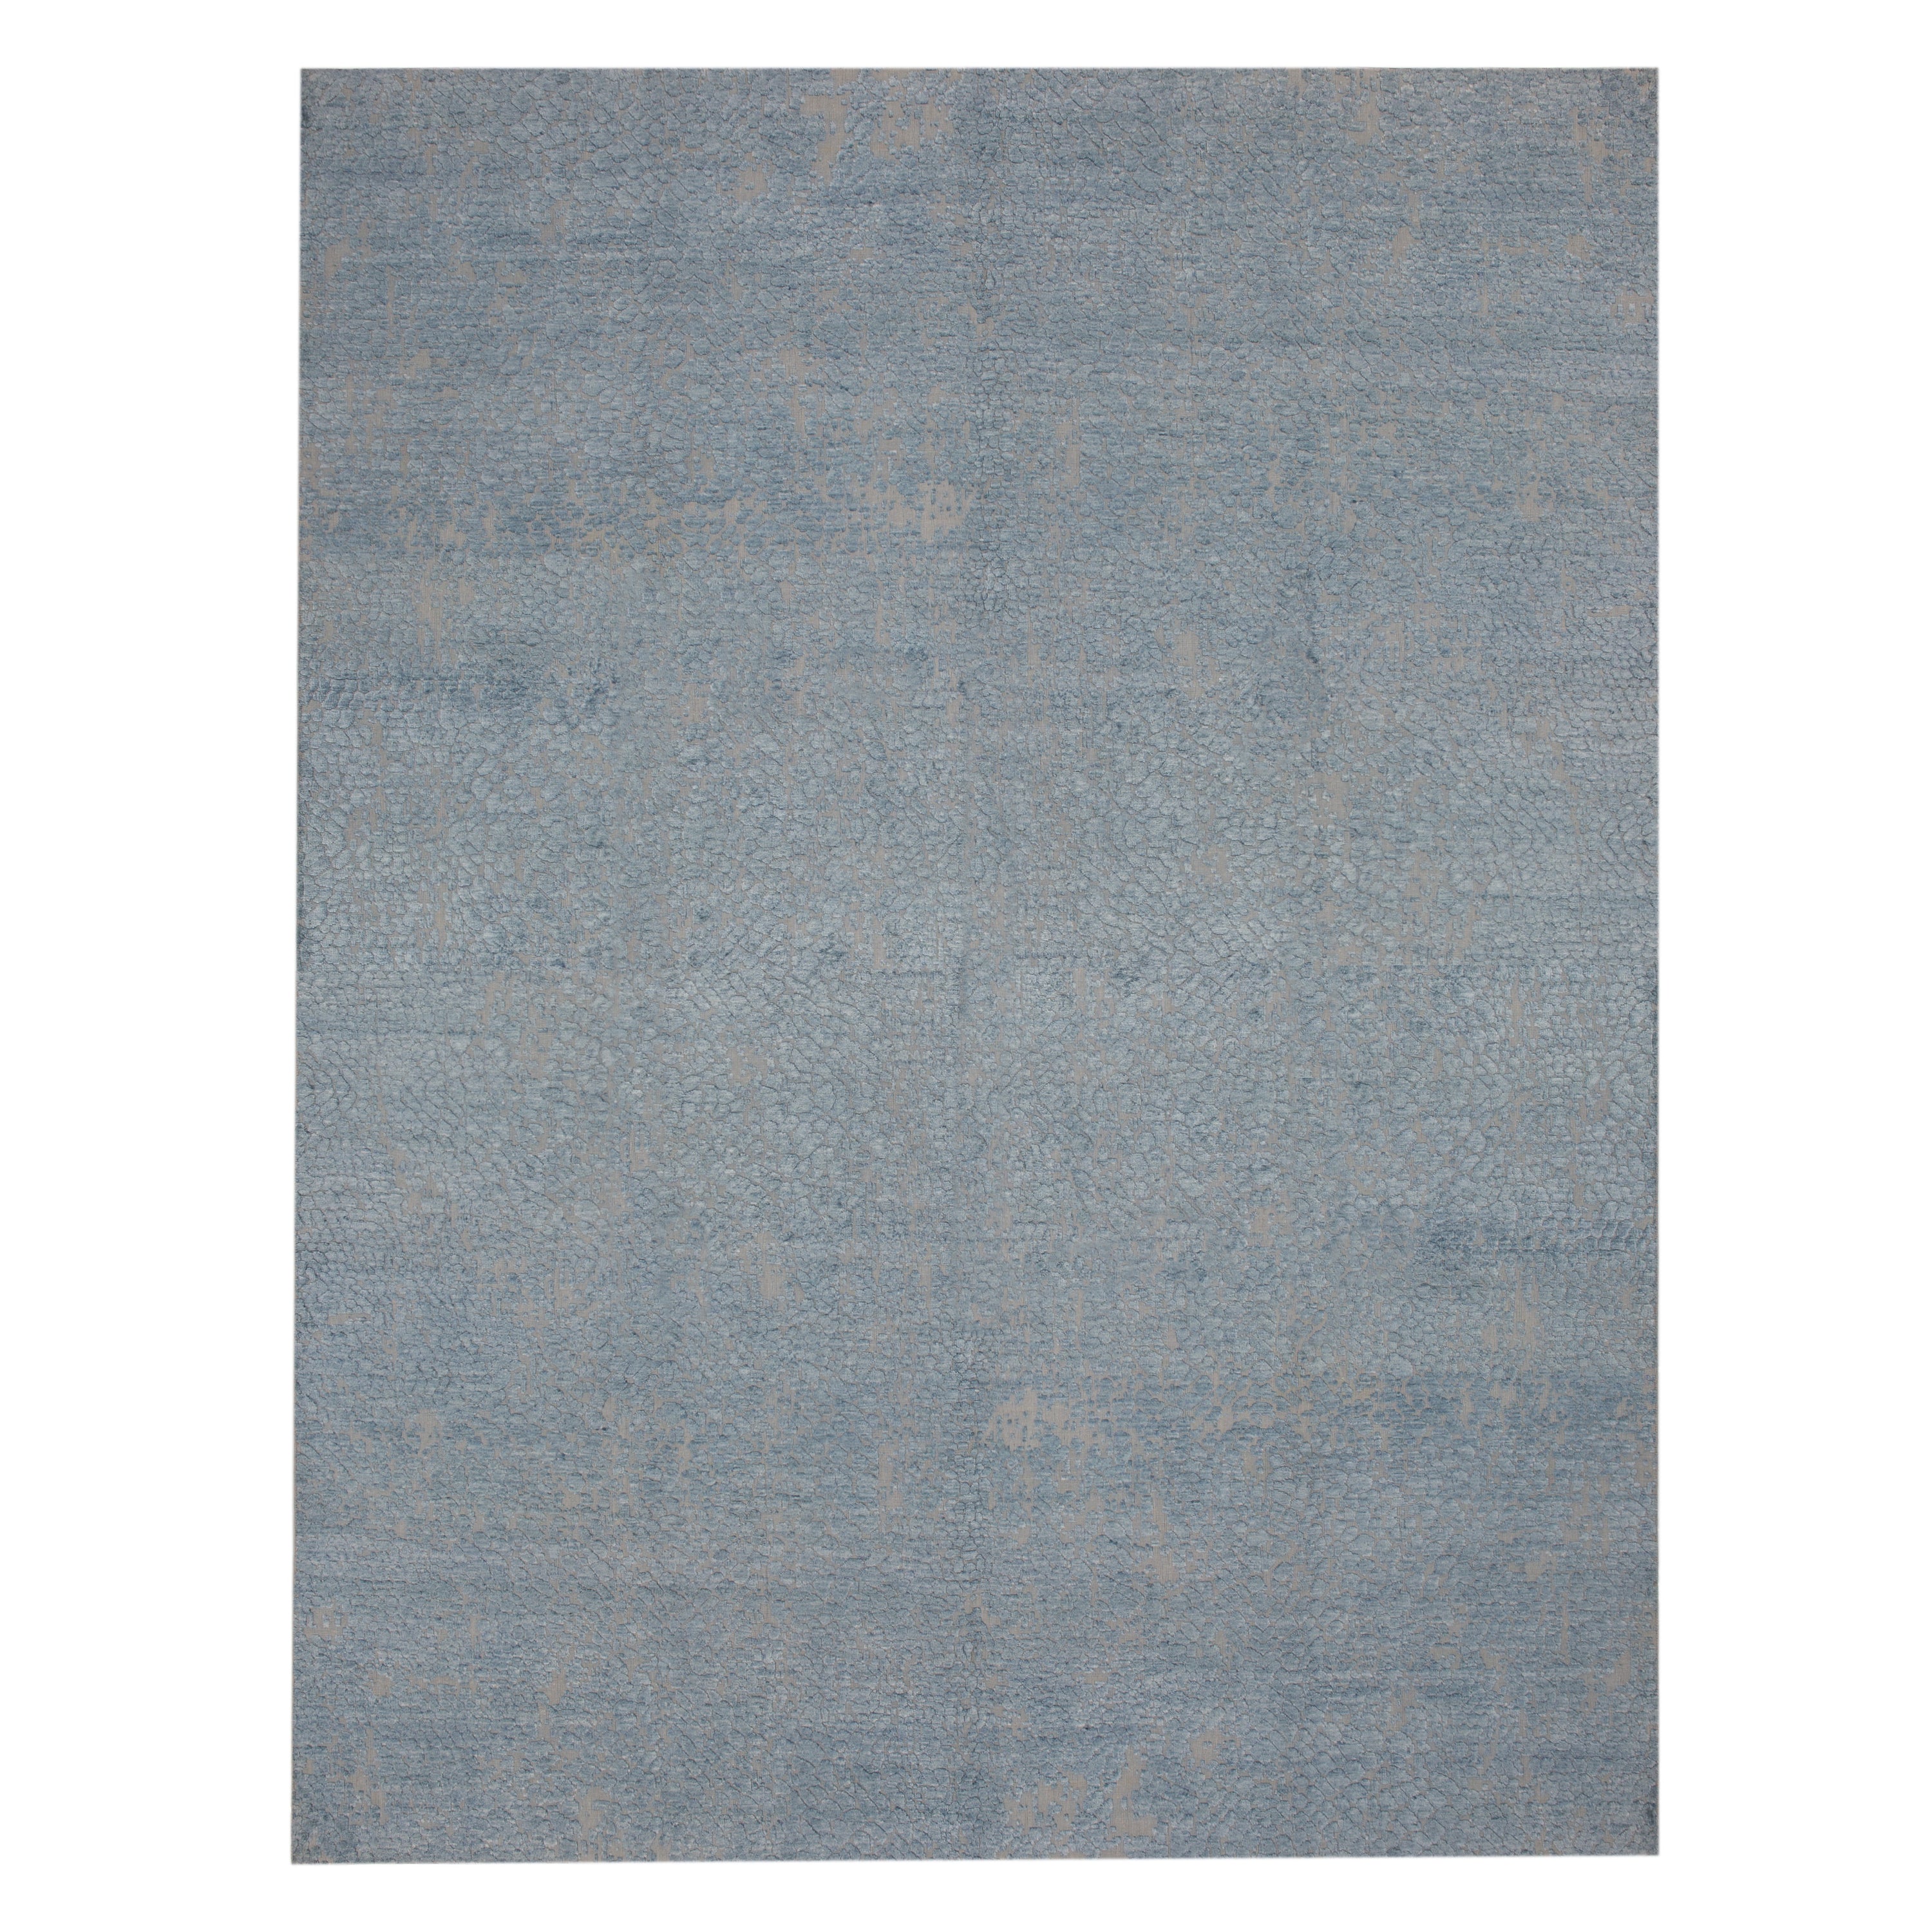 Hand-knotted Wool Rug - 11'10" x 9'1" Default Title